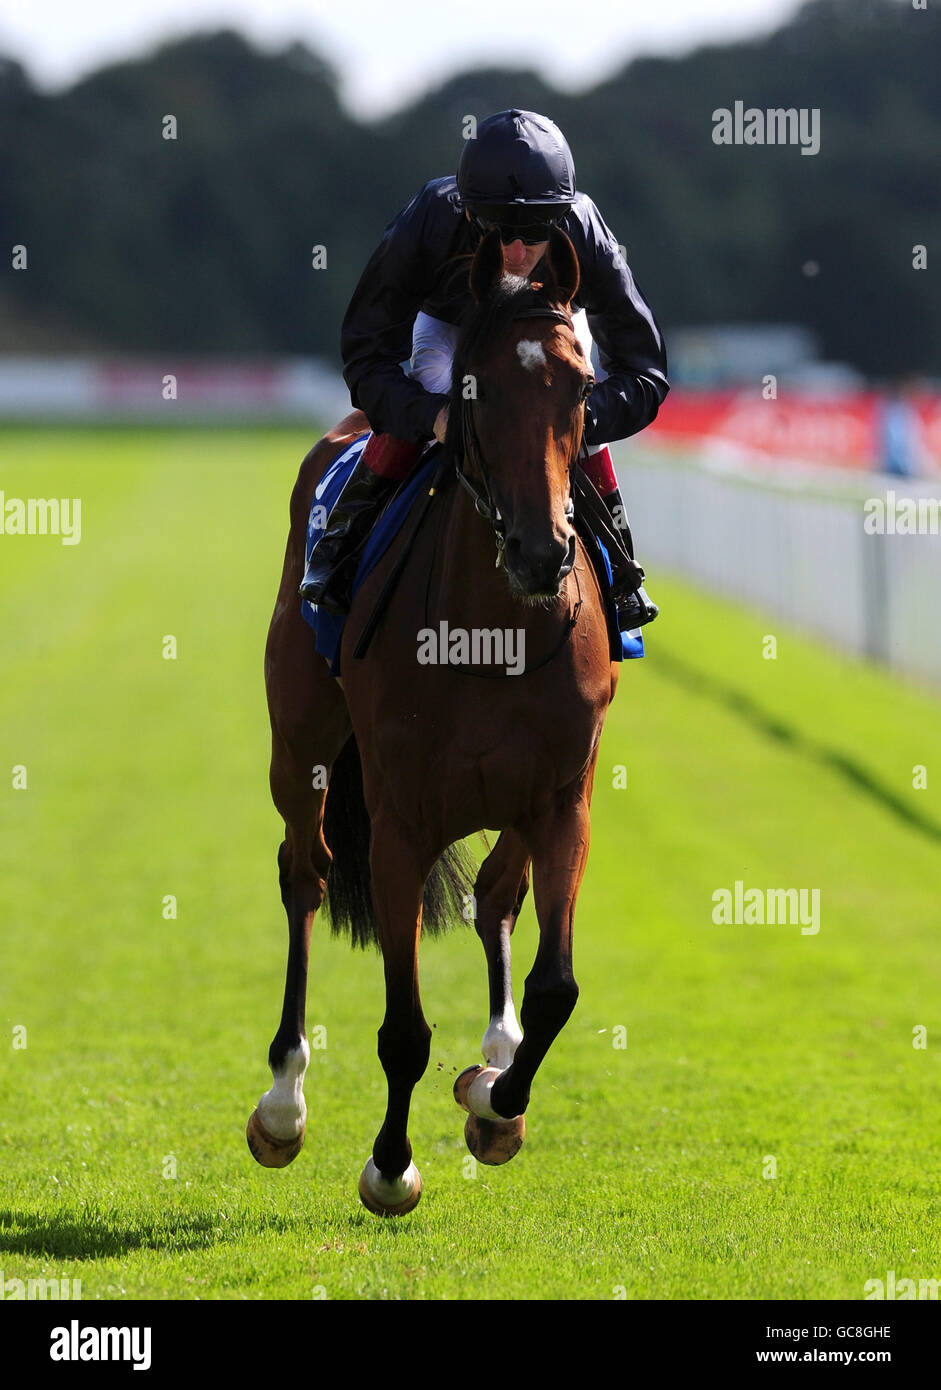 Horse Racing - Ebor Festival - Darley Yorkshire Oaks and Ladies Day - York Racecourse. Tamarind ridden by Johnny Murtagh going to post for the Darley Yorkshire Oaks (Fillies' Group 1) at York racecourse Stock Photo